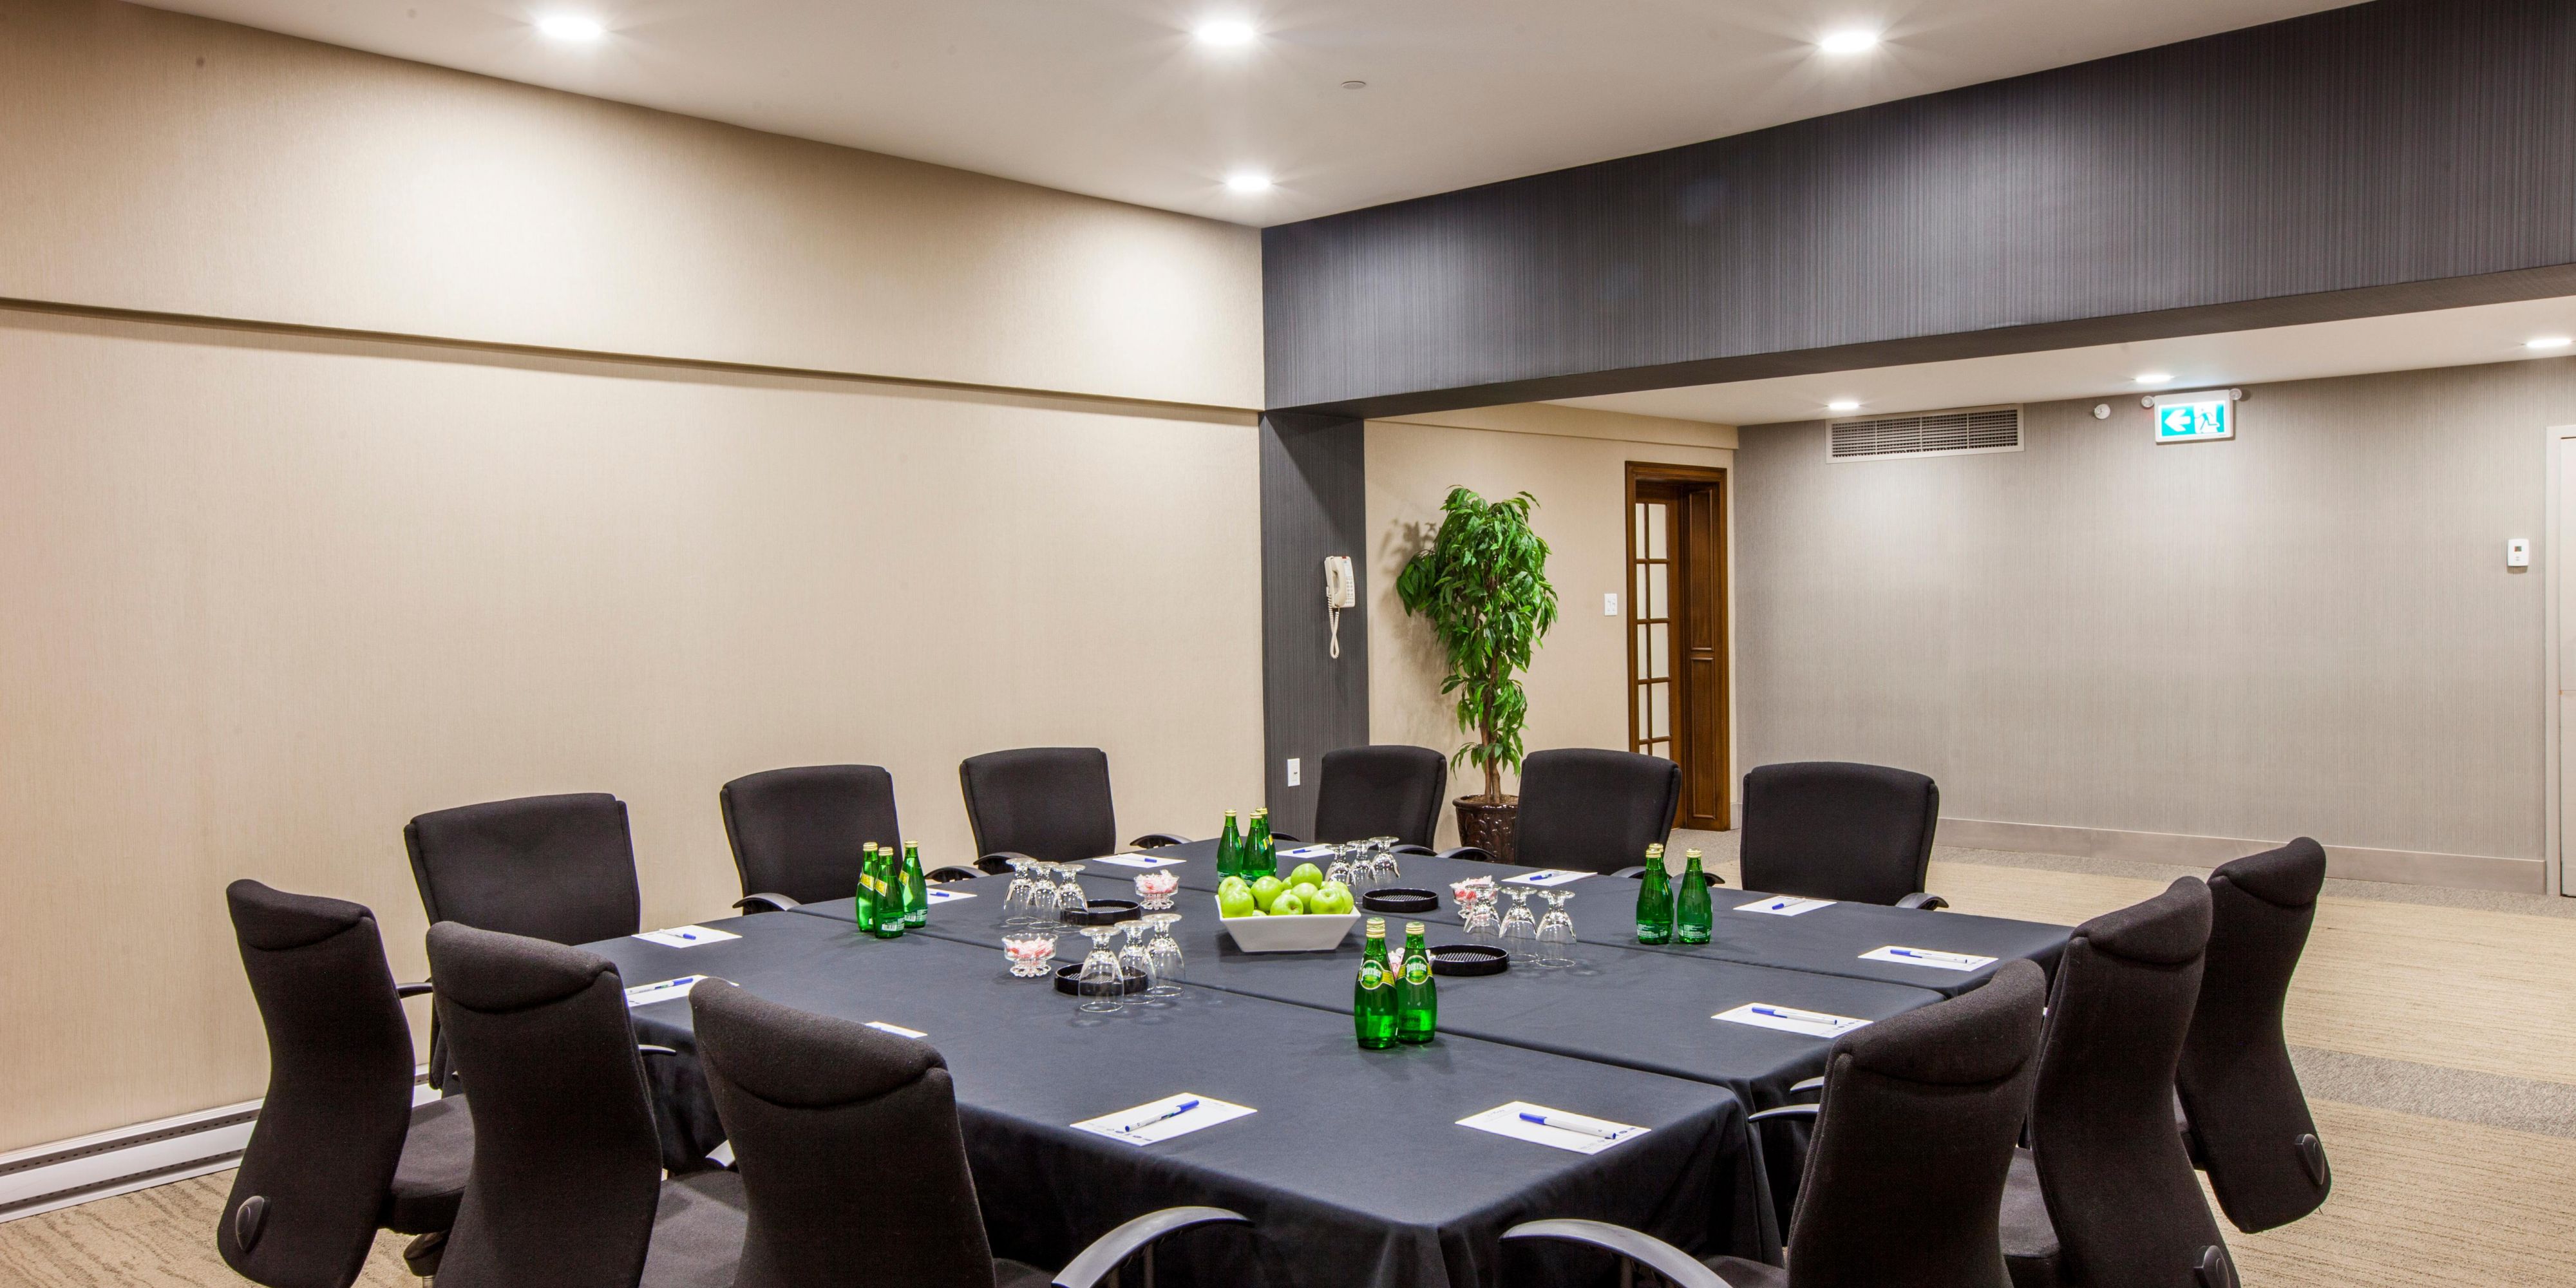 With 3400 sq ft of fully flexible event space, let us host your Saint John meeting or event. We are able to accommodate all of your meeting and event needs, whether it's 10 or 100 people. We offer full onsite catering, and we are able to do up to 65 people banquet-style, and 100 people theater-style. Call us at 506-642-2622 for more information.